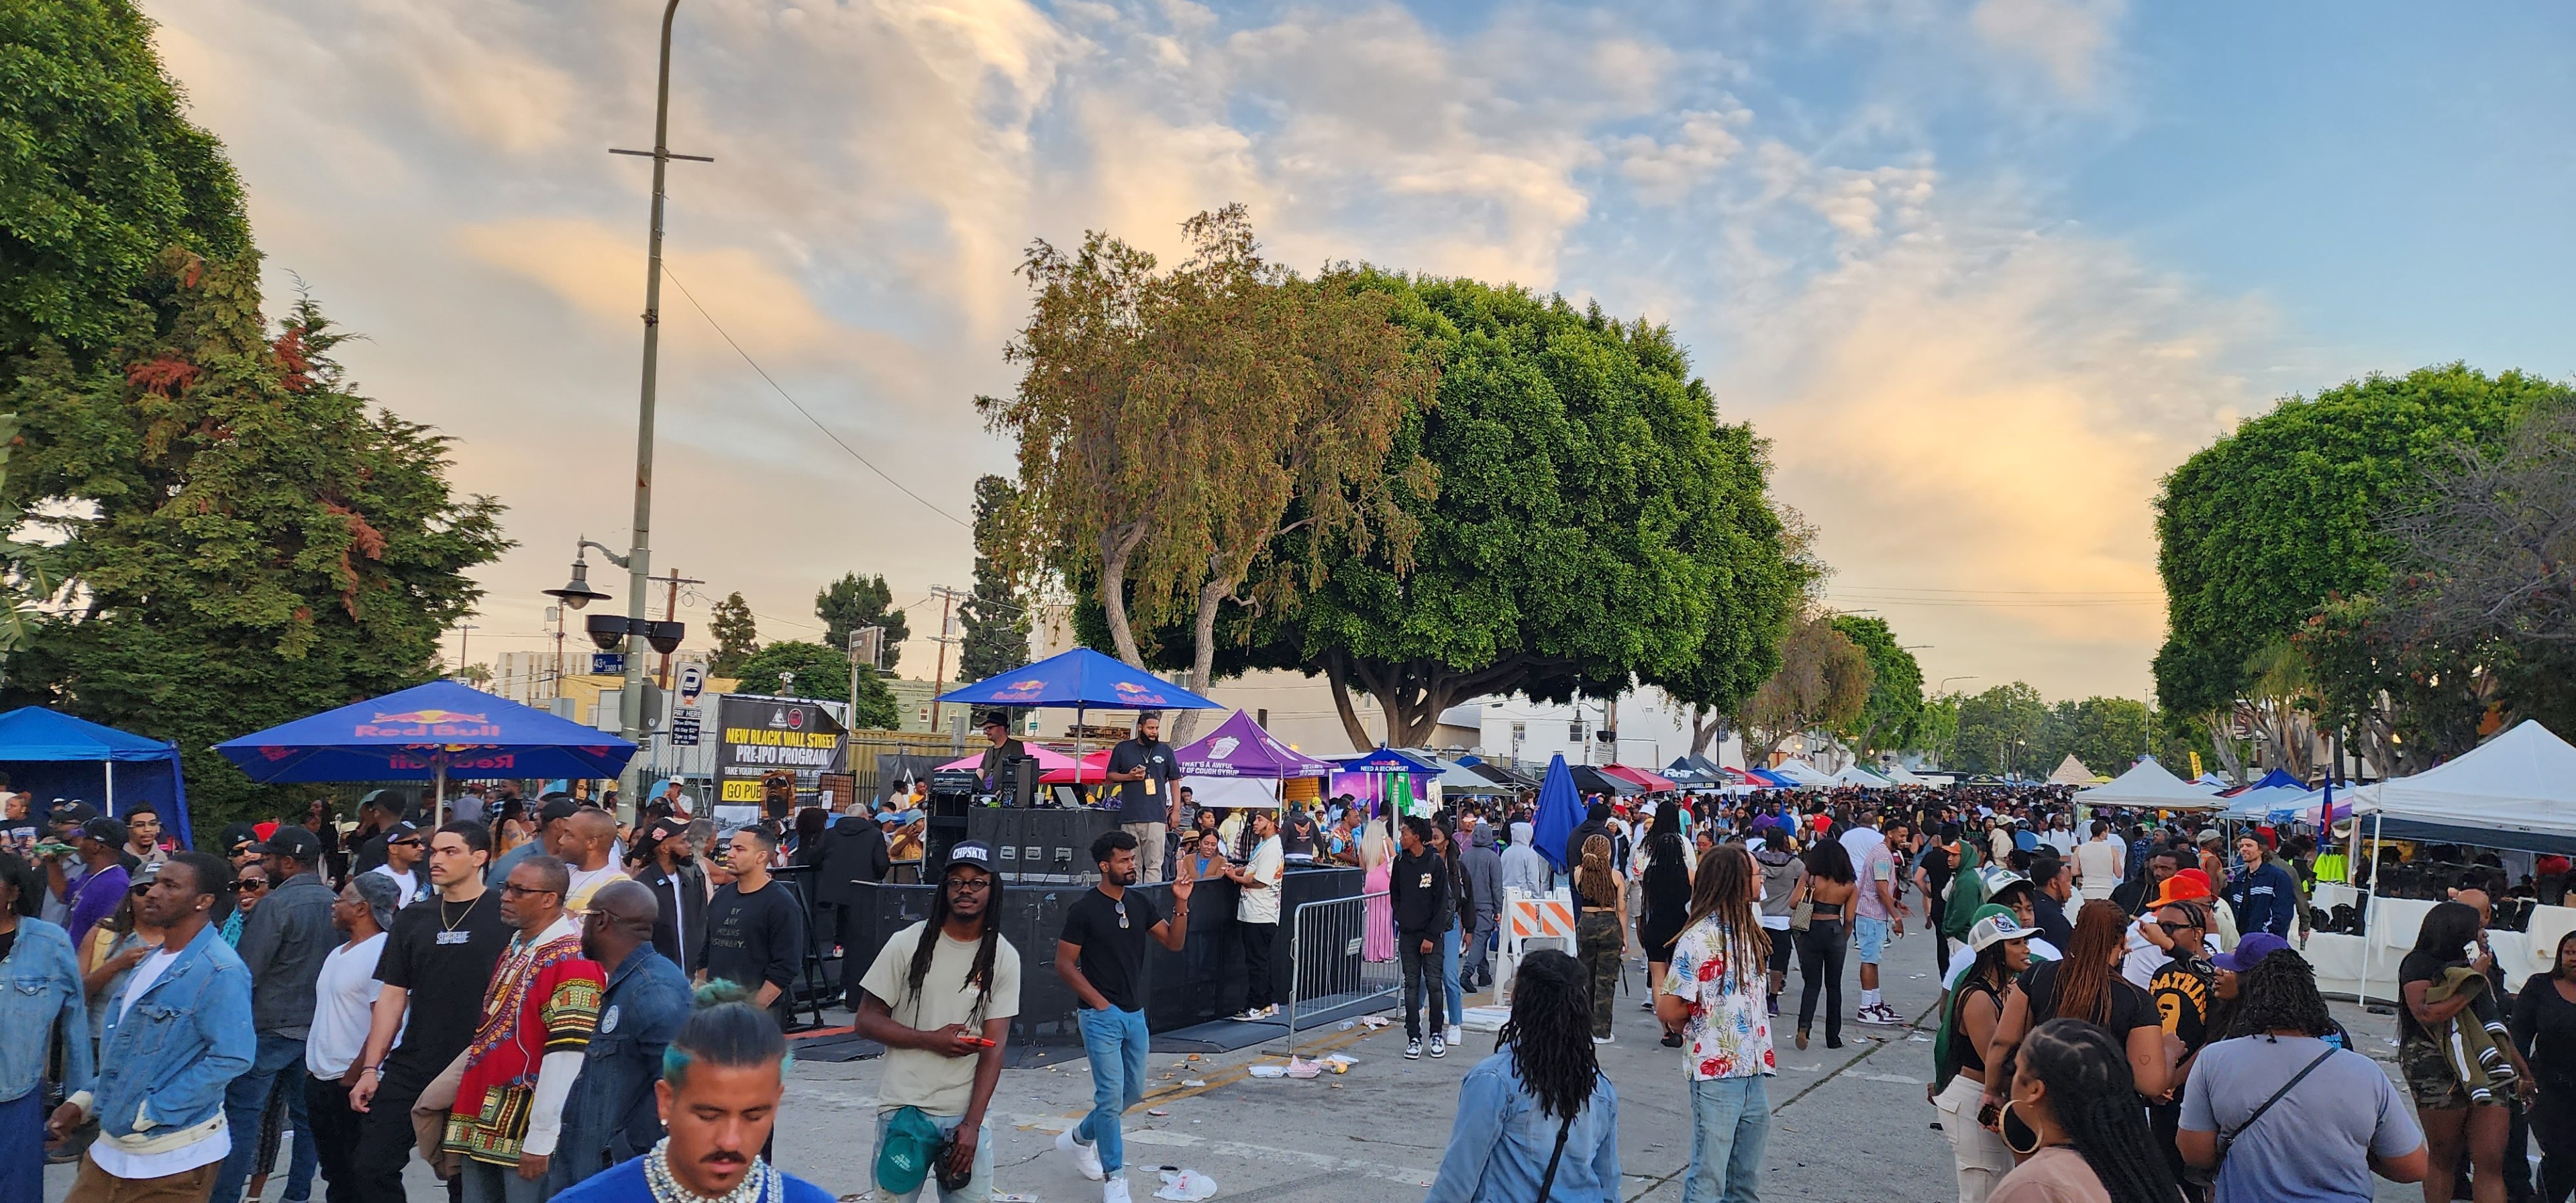 People gather in Leimert Park on Juneteenth.